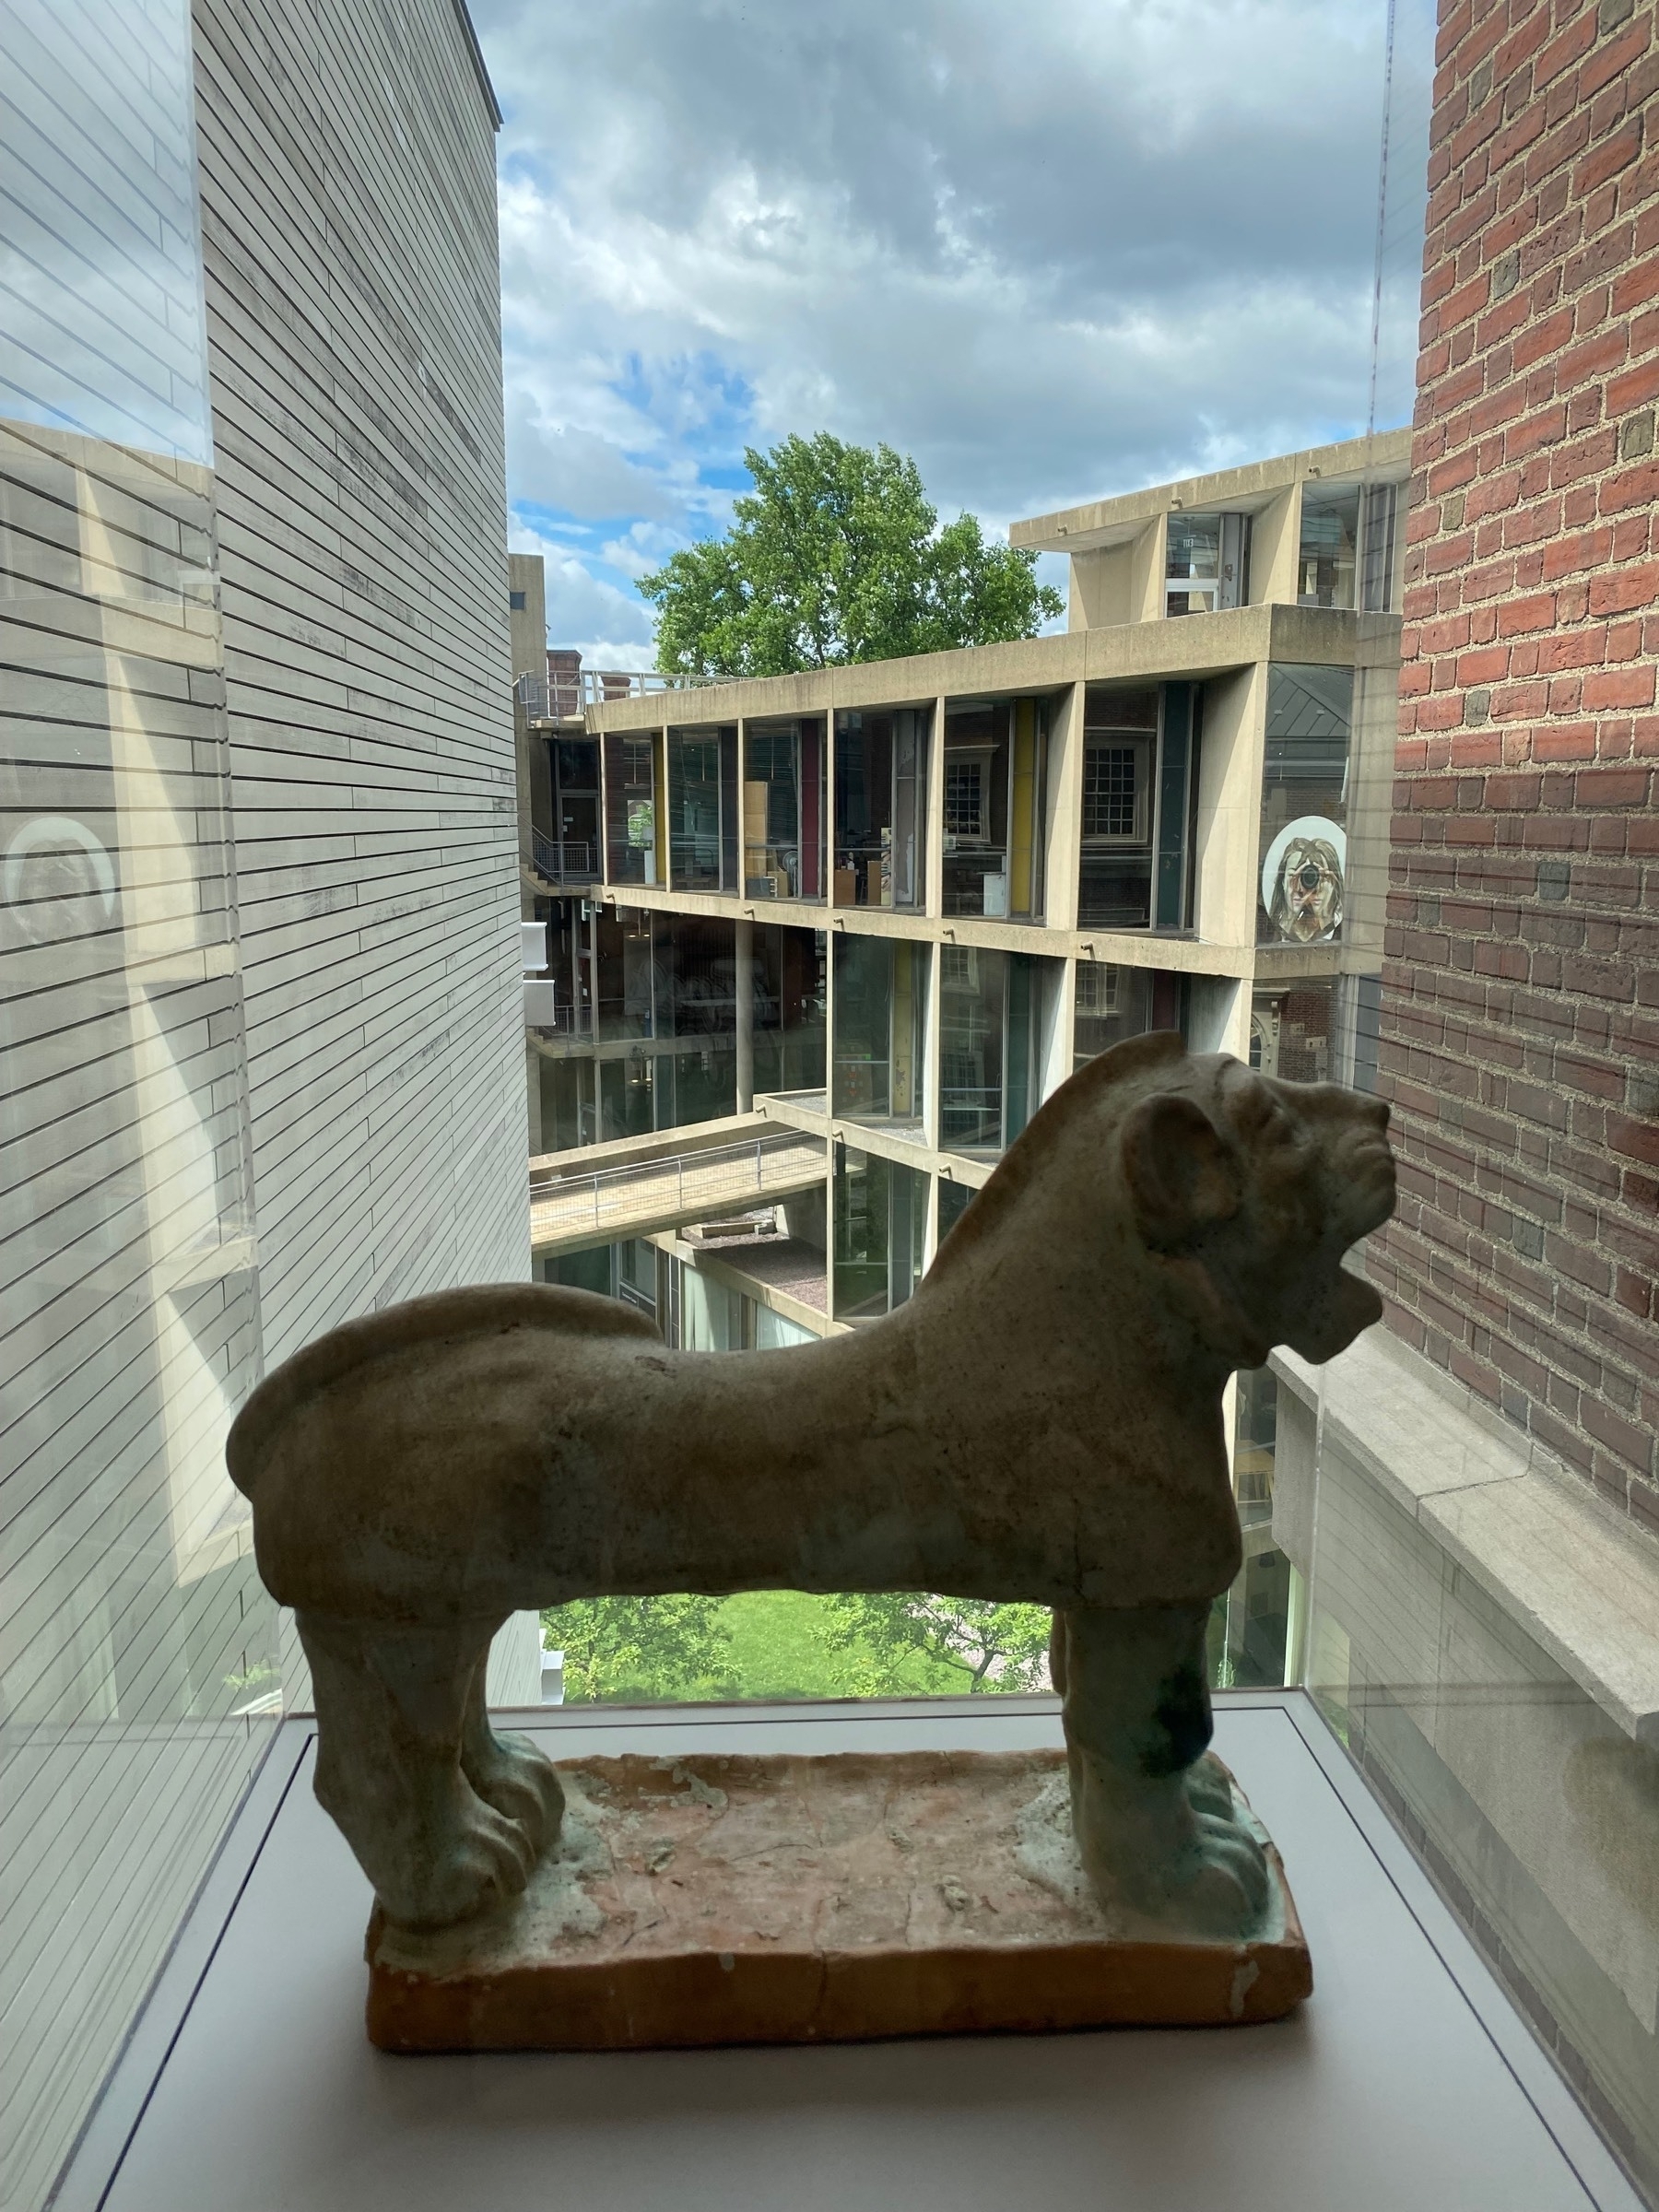 Stone figure of a lion standing in front of a window, with buildings visible in the background.